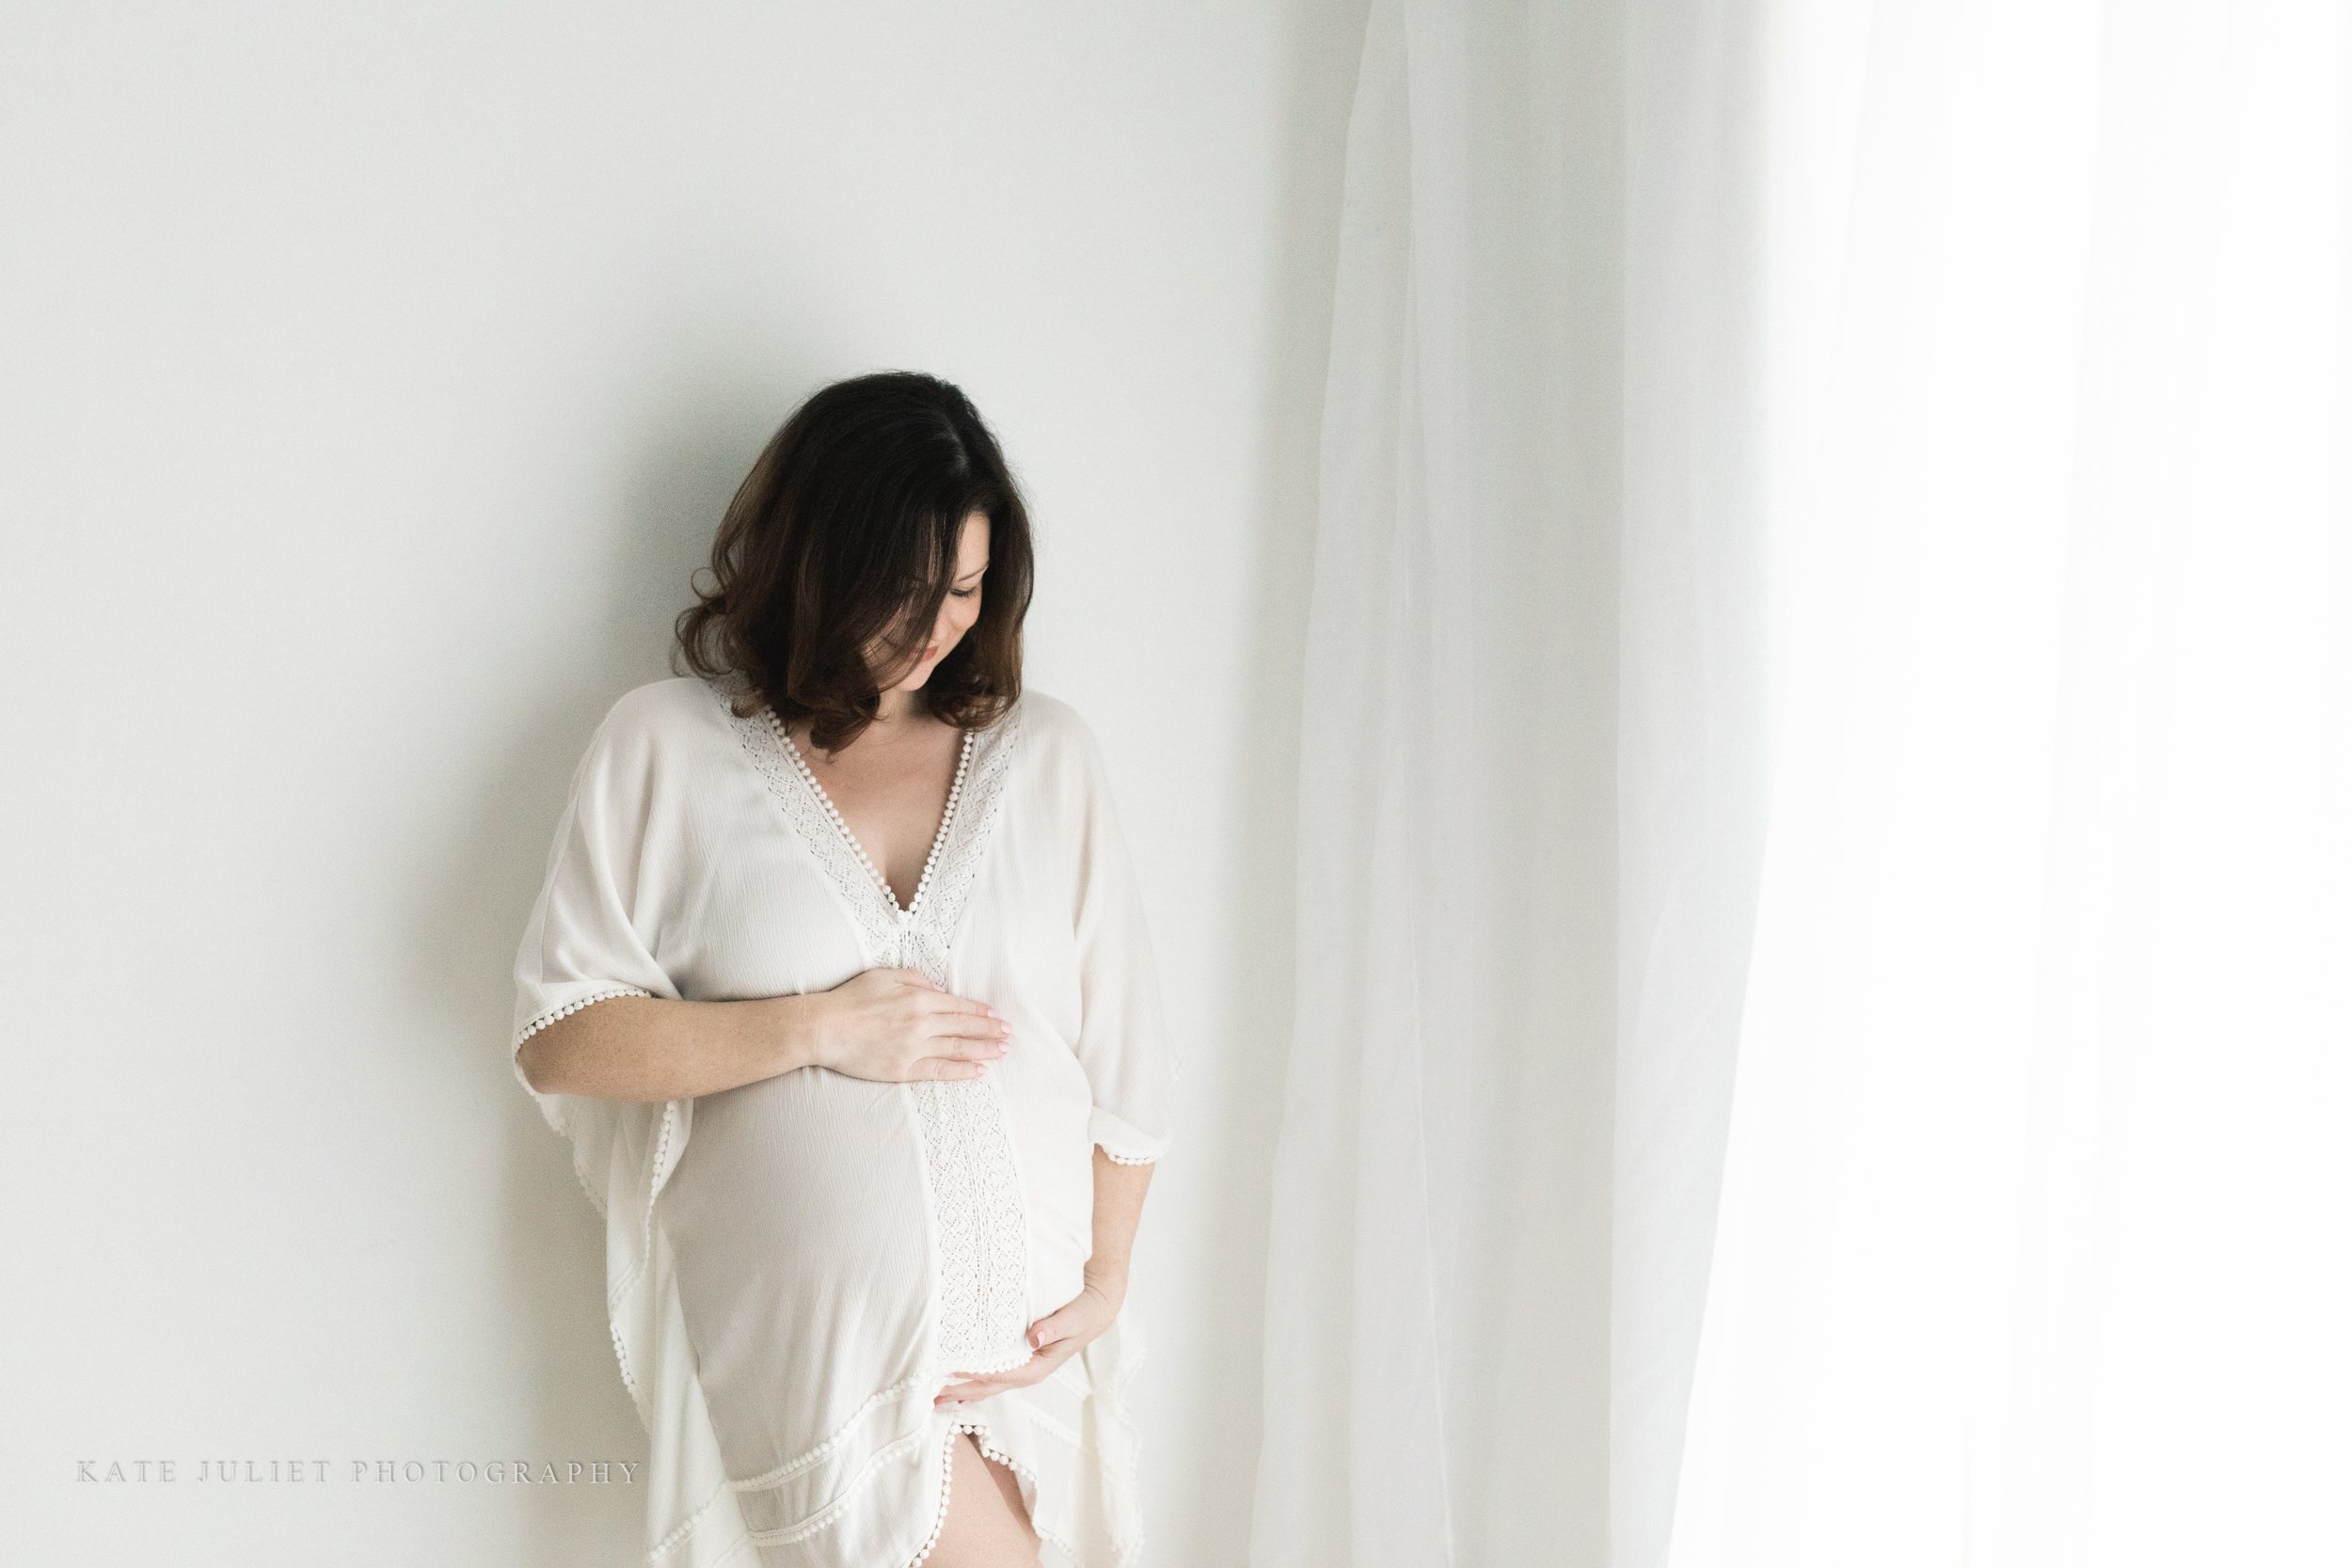 Northern VA Twin Pregnancy and Baby Photographer | Kate Juliet Photography